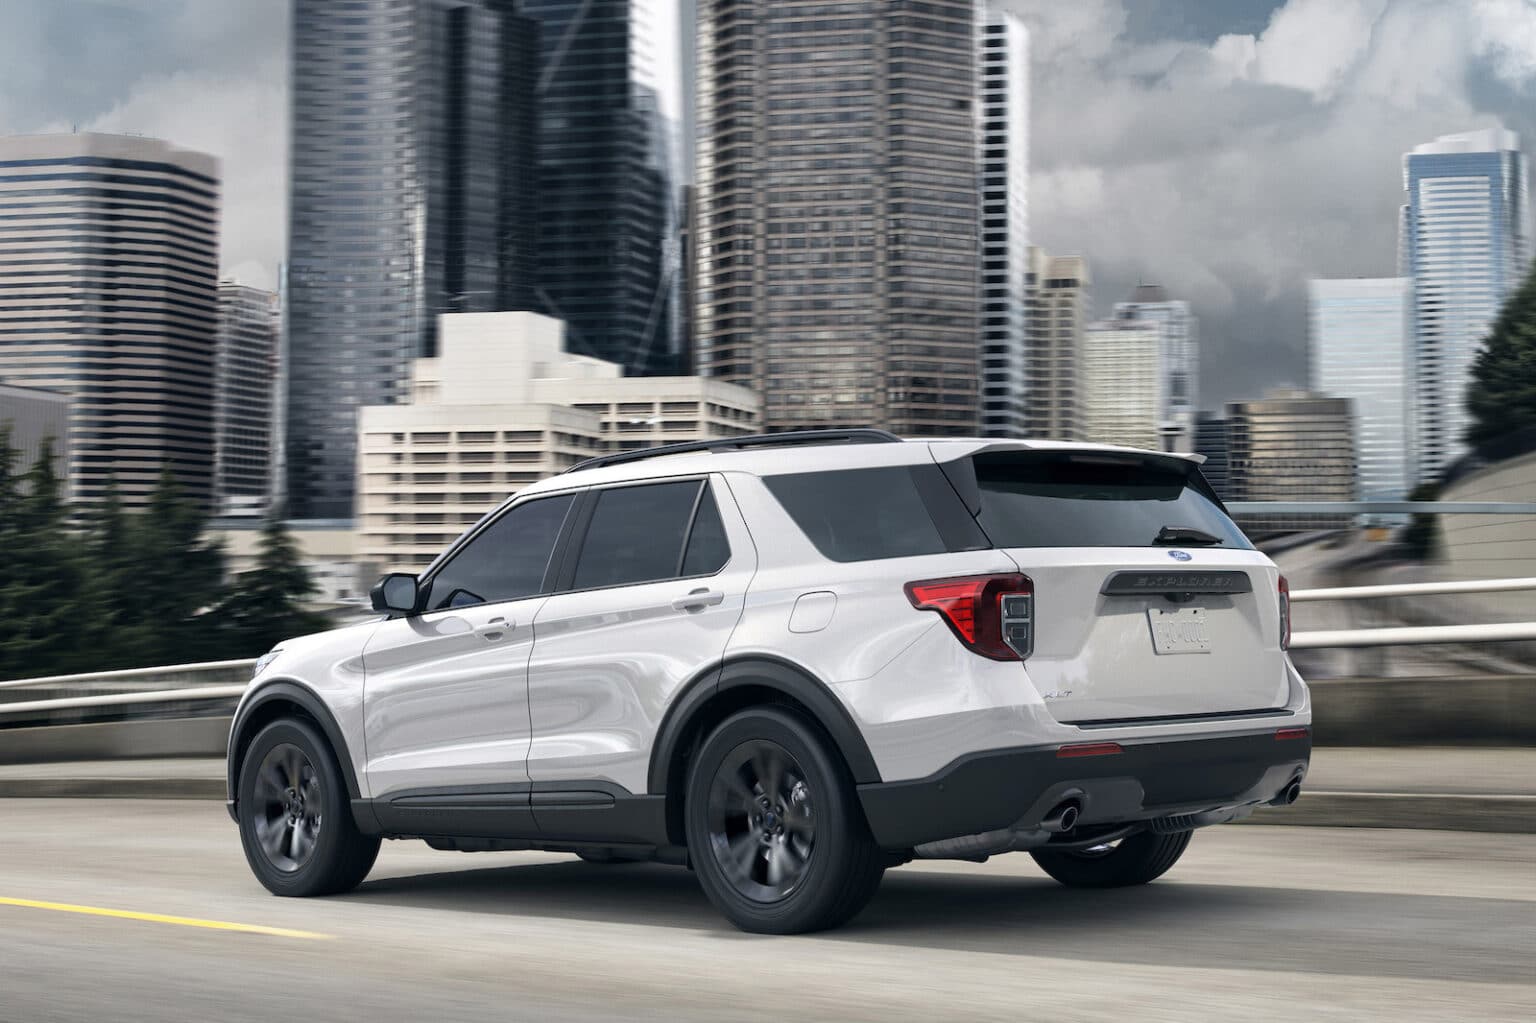 Ford Explorer Recall Being Investigated by the Feds